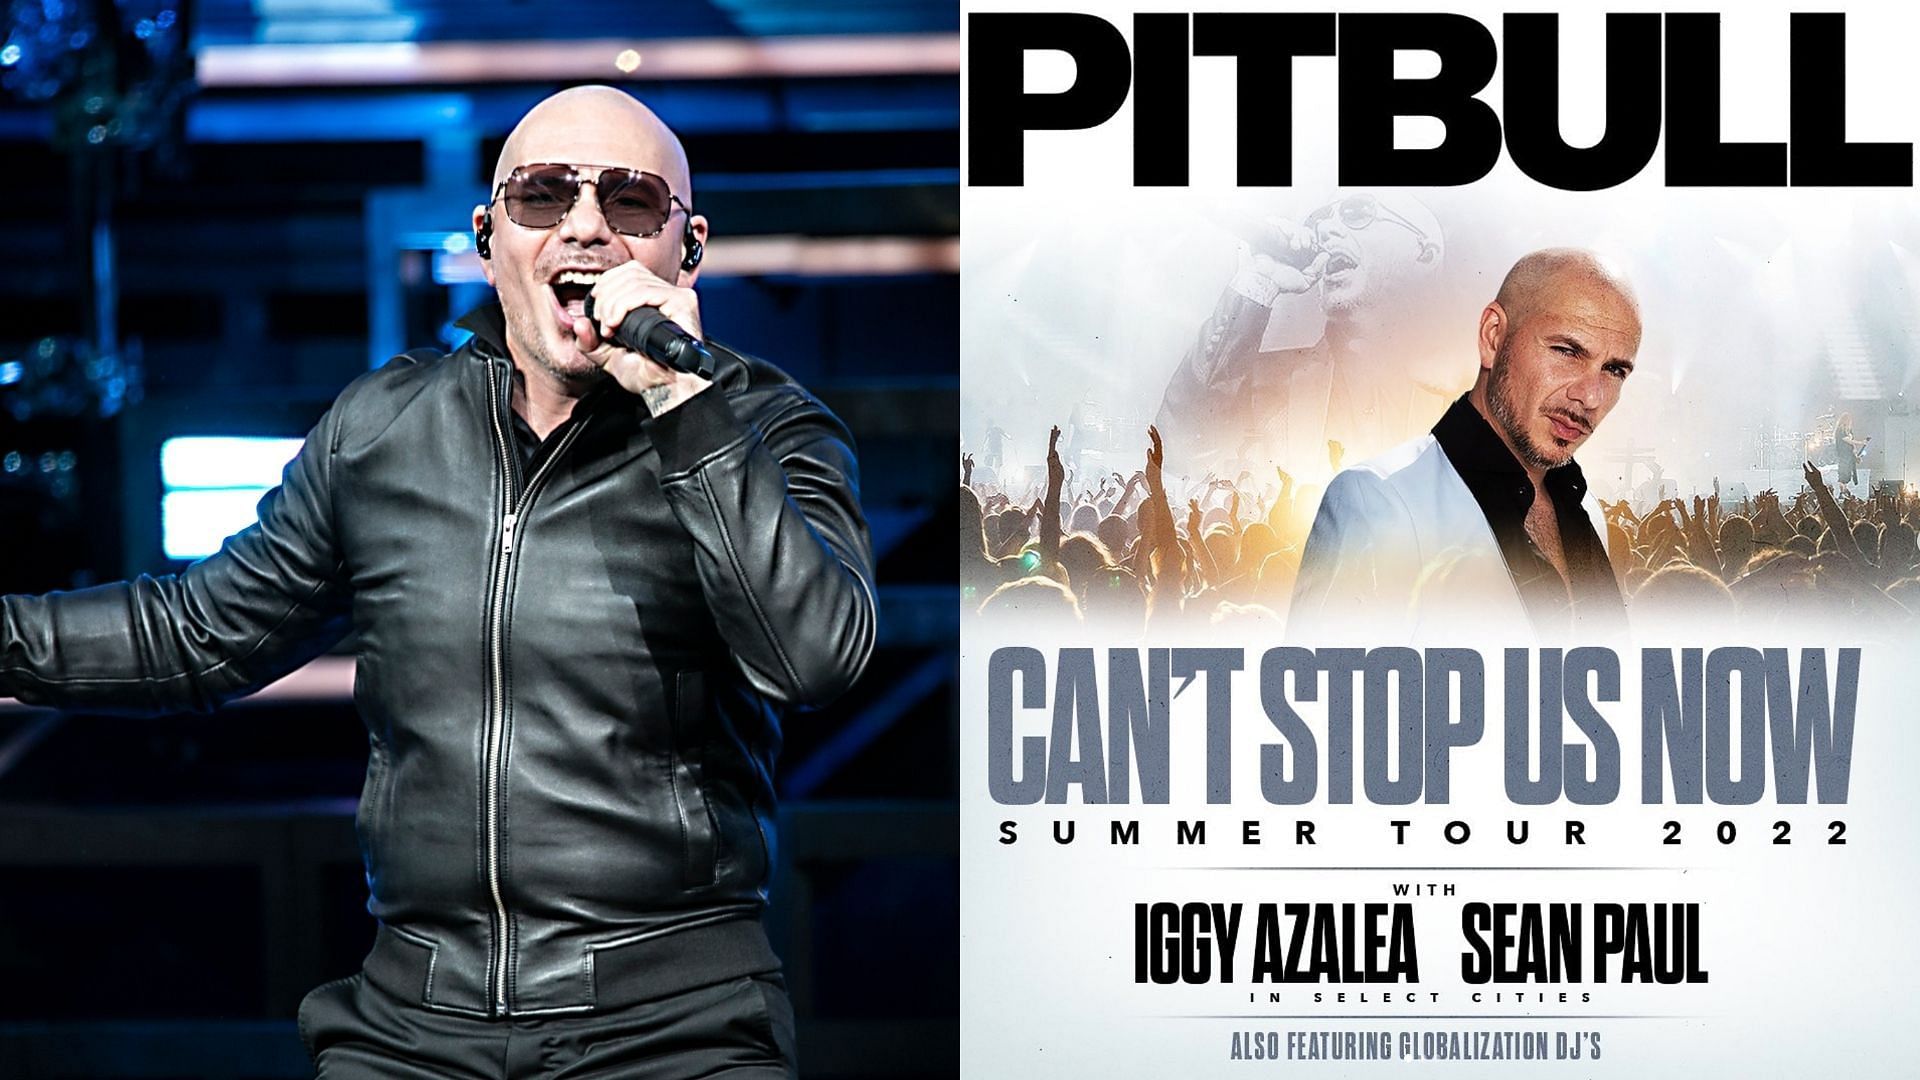 Pitbull has announced his &lsquo;Can&rsquo;t Stop Us Now&rsquo; 2022 tour to begin this May. (Image via Jeff Hahne/Getty Images and Instagram / @pitbull)